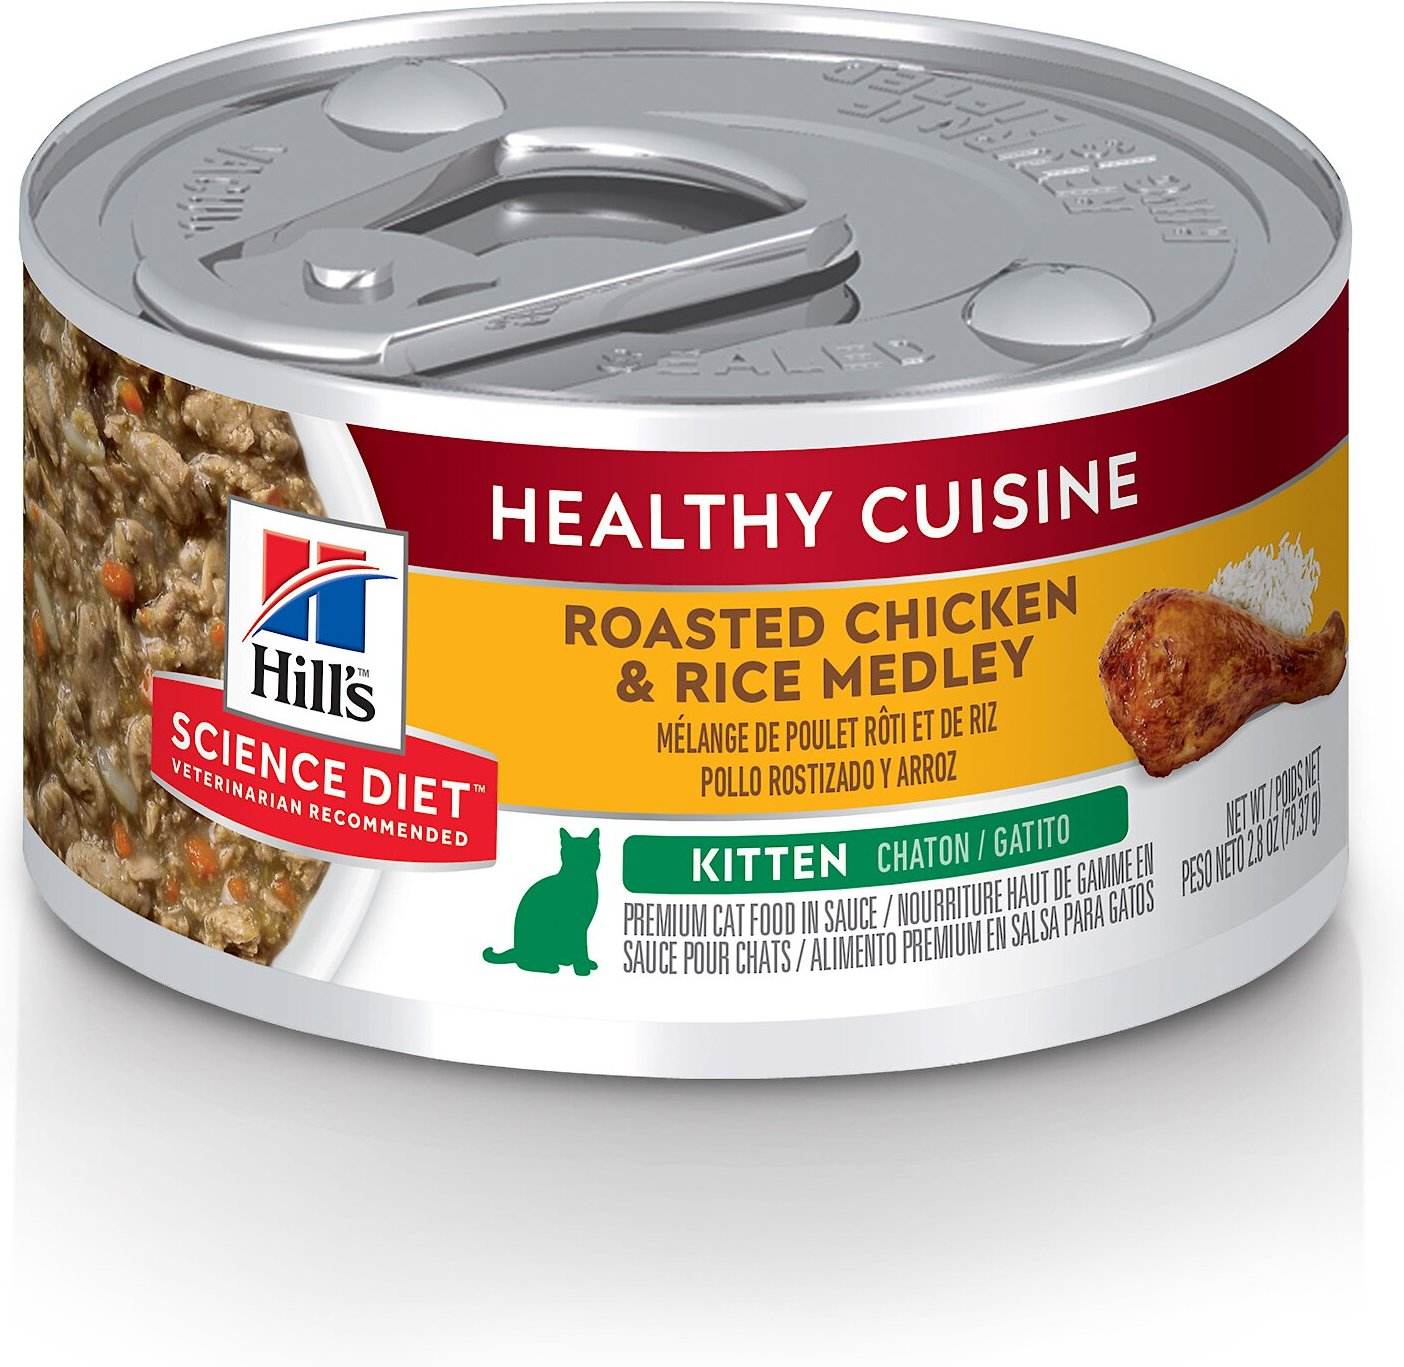 Hill's Science Diet Kitten Healthy Cuisine Roasted Chicken & Rice Medley Canned Cat Food, 2.8-oz, case of 24 By Hill's Science Diet
